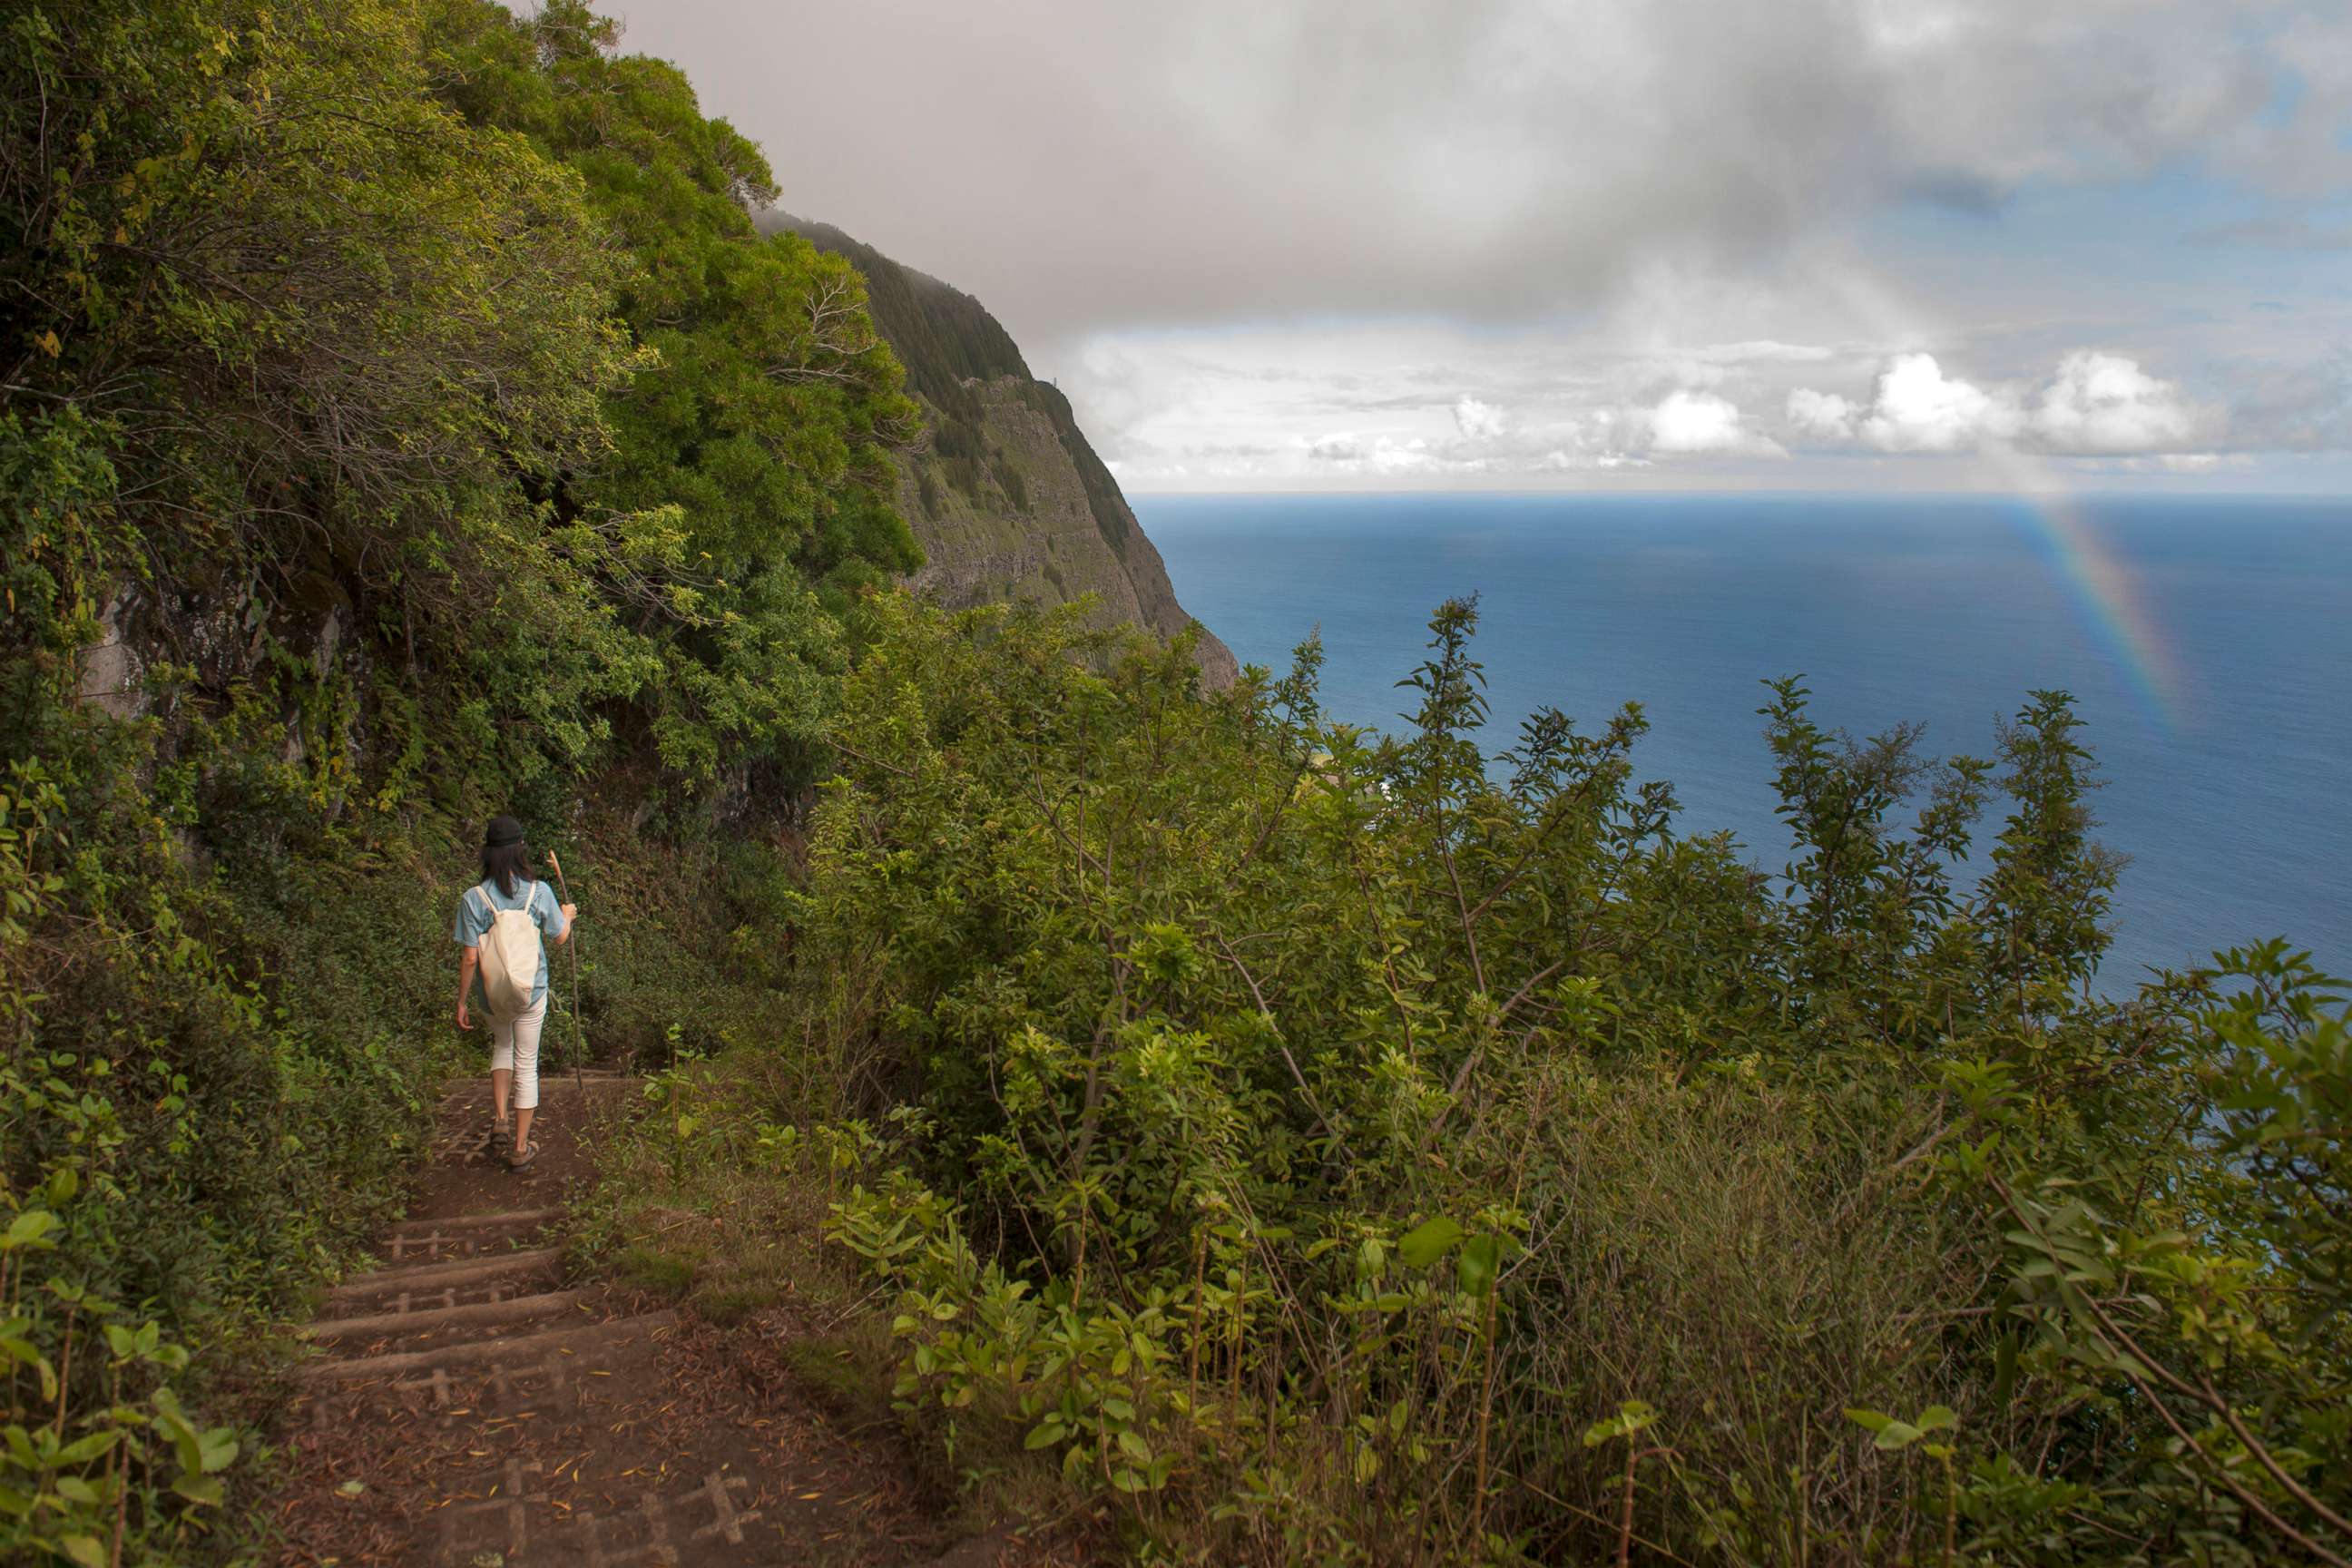 PHOTO: In this undated file photo, a hiker makes her way down a descent on the Kalaupapa sea cliff trail to Kalaupapa National Historical Park in Hawaii.